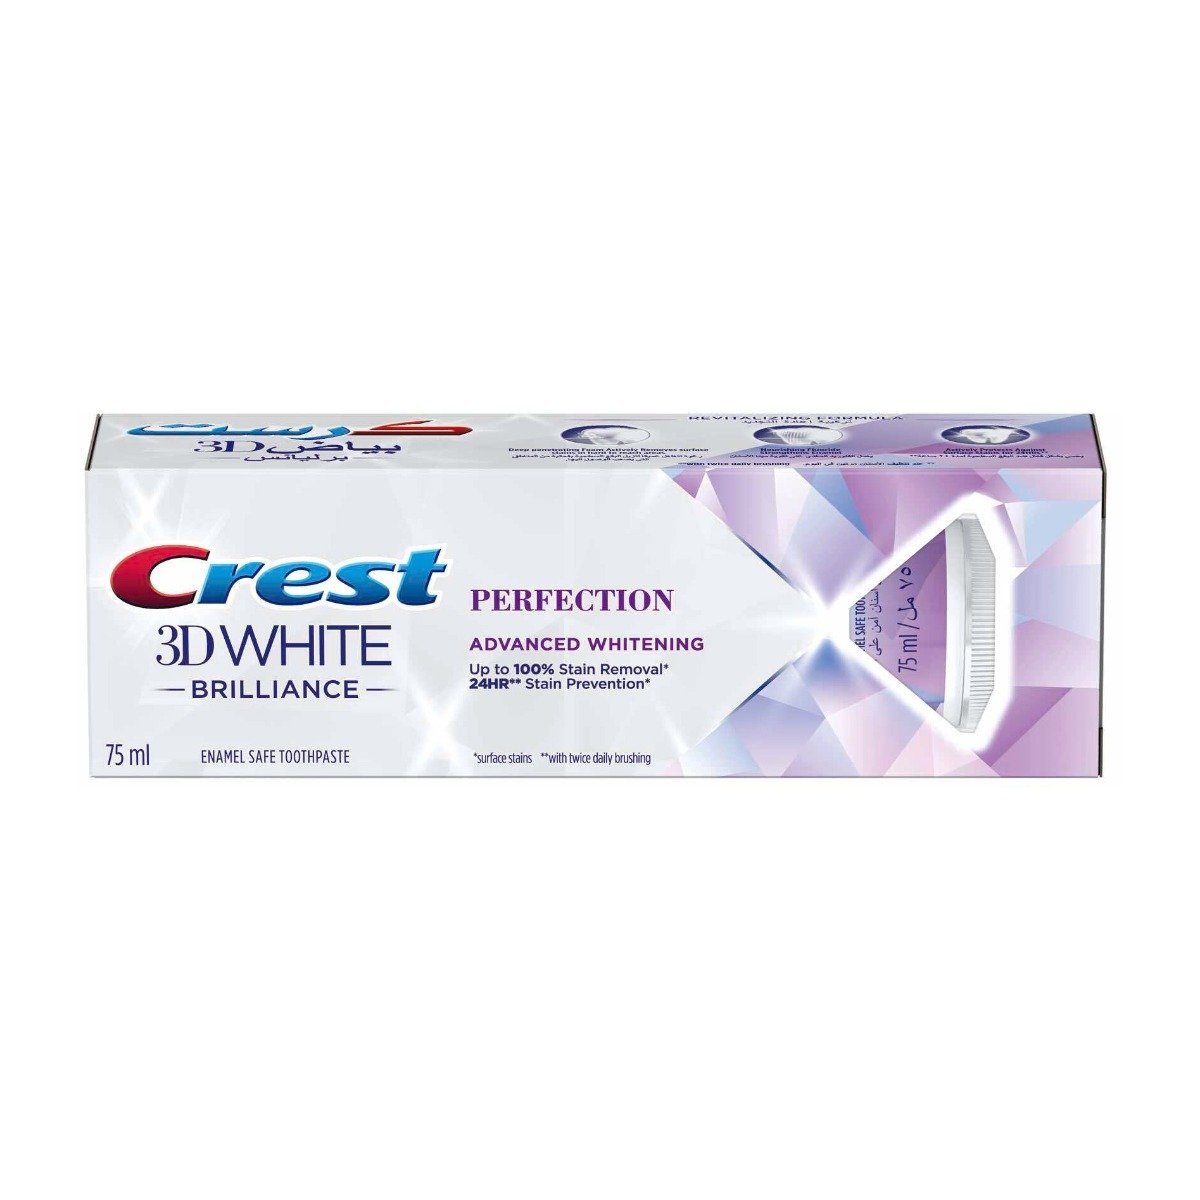 Crest 3D White Brilliance Perfection Toothpaste – 75ml - Bloom Pharmacy